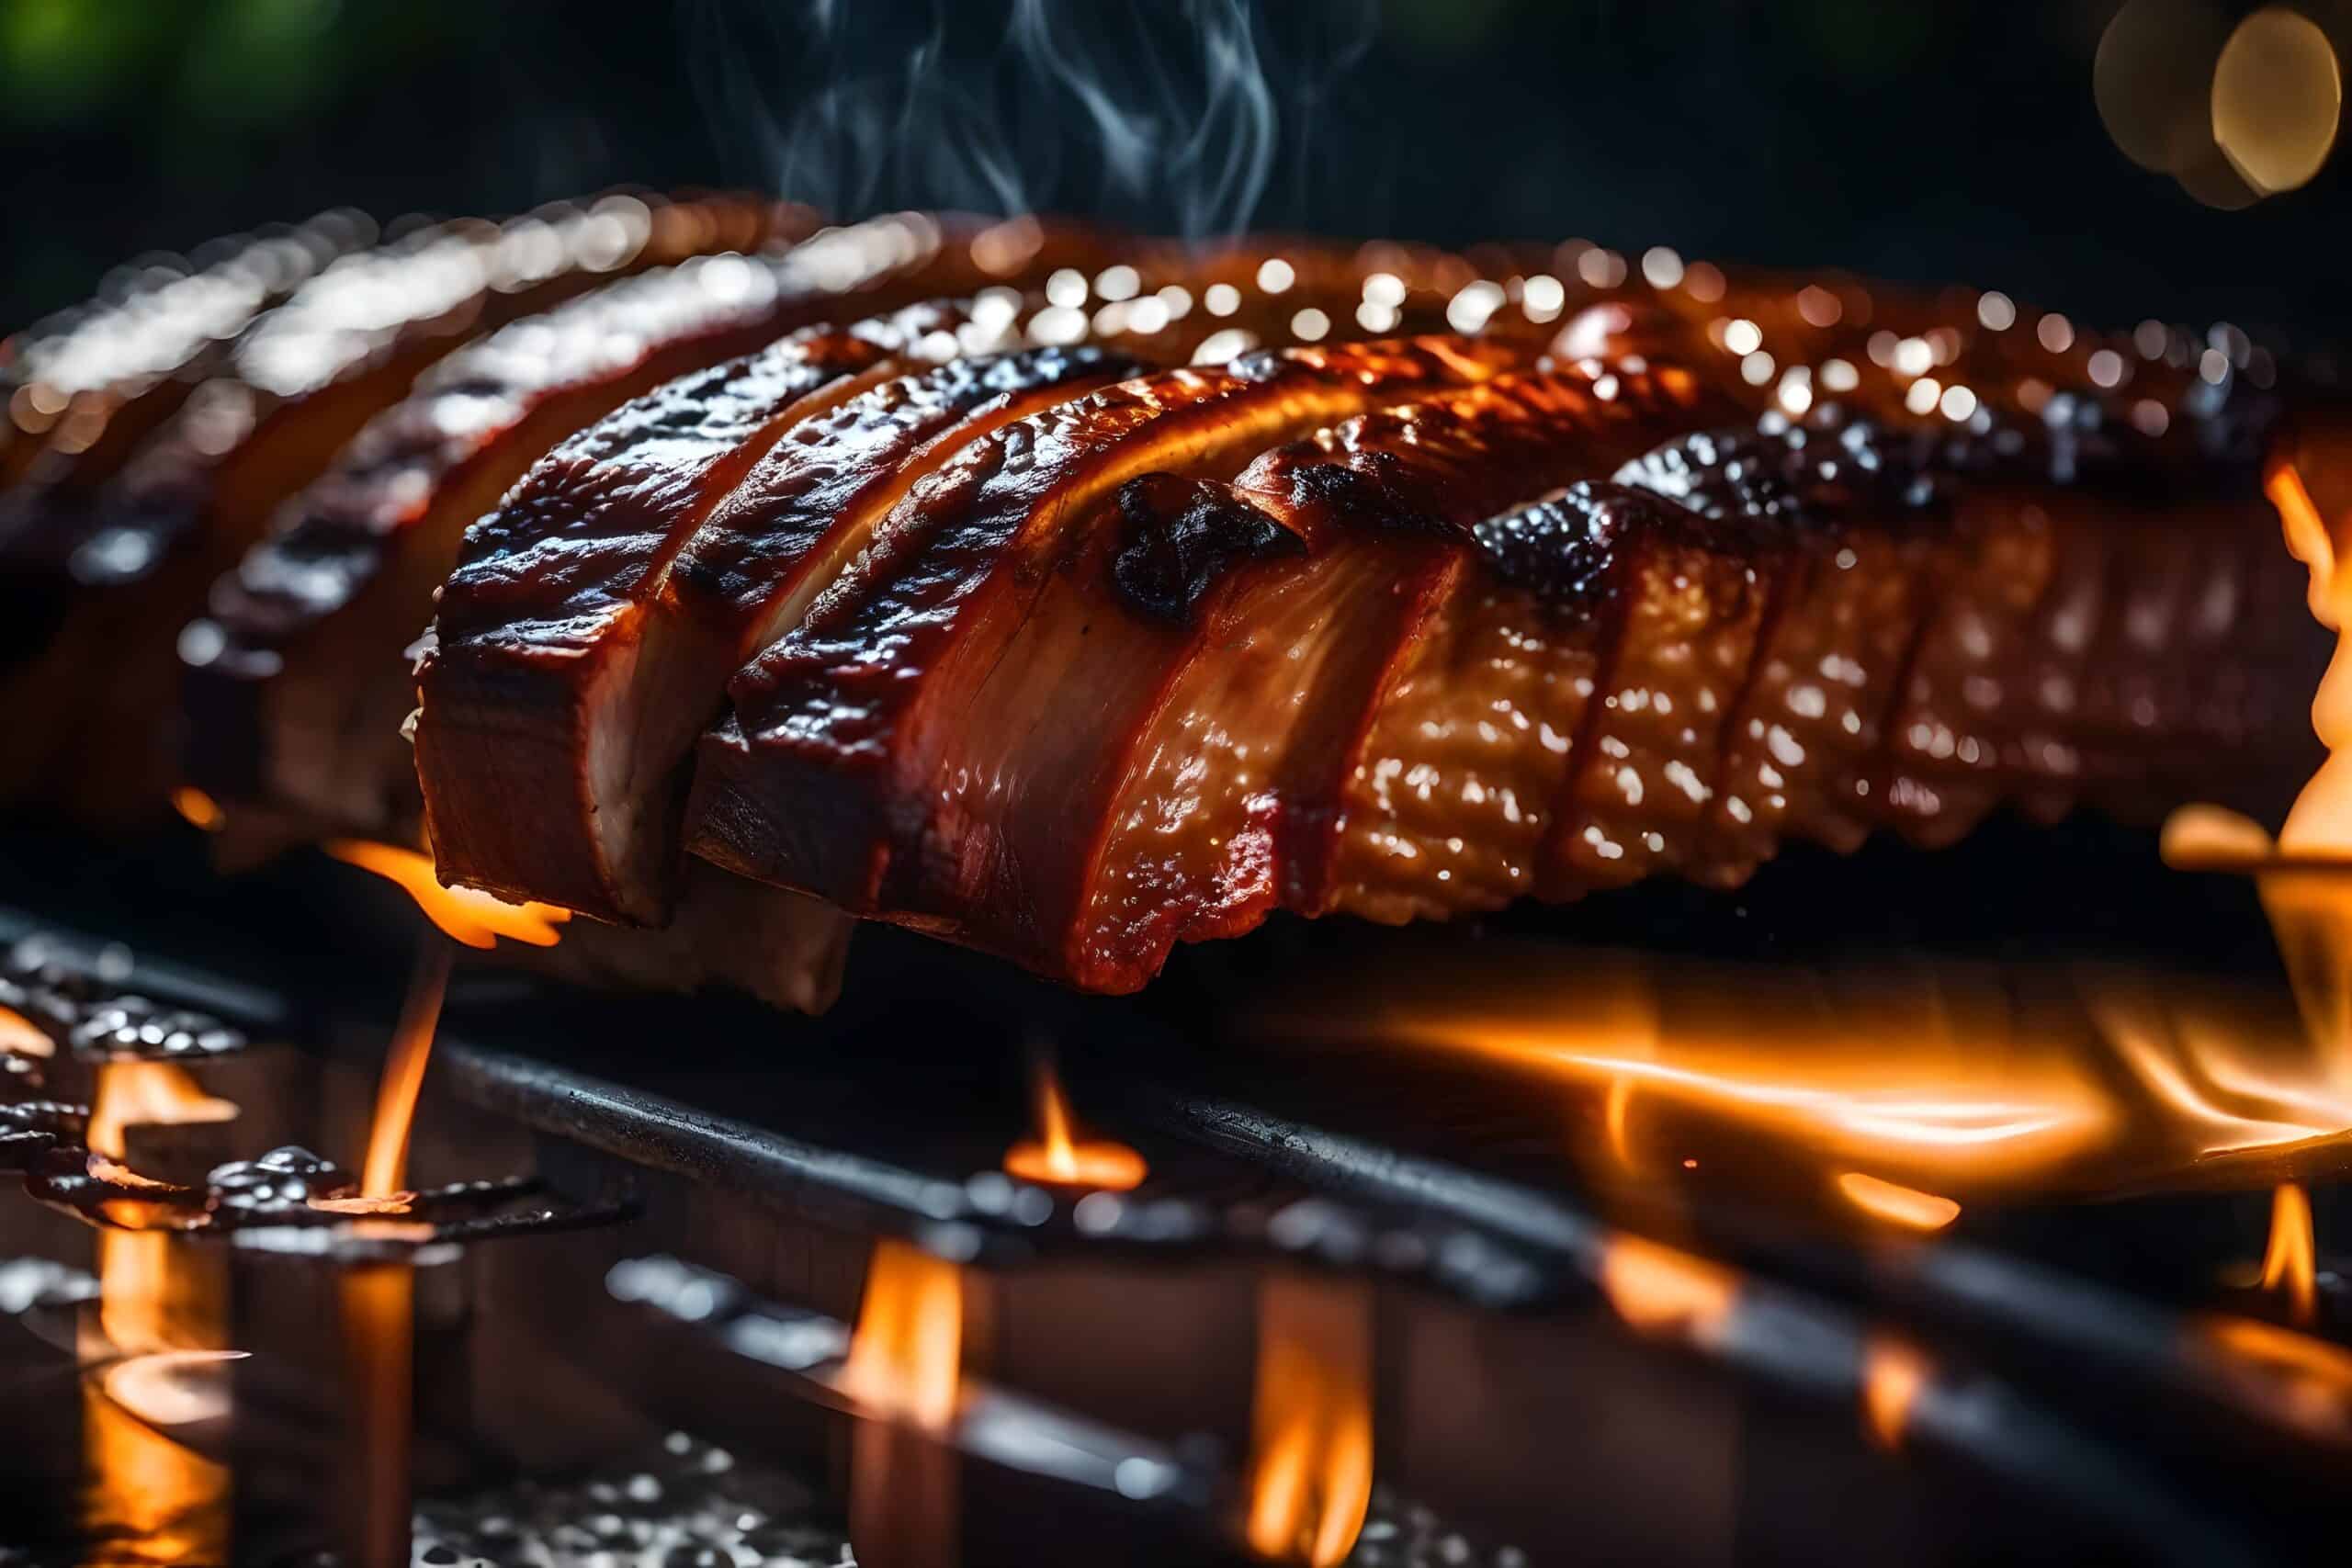 www.appr.com : How To Smoke Ribs On A Pellet Grill?